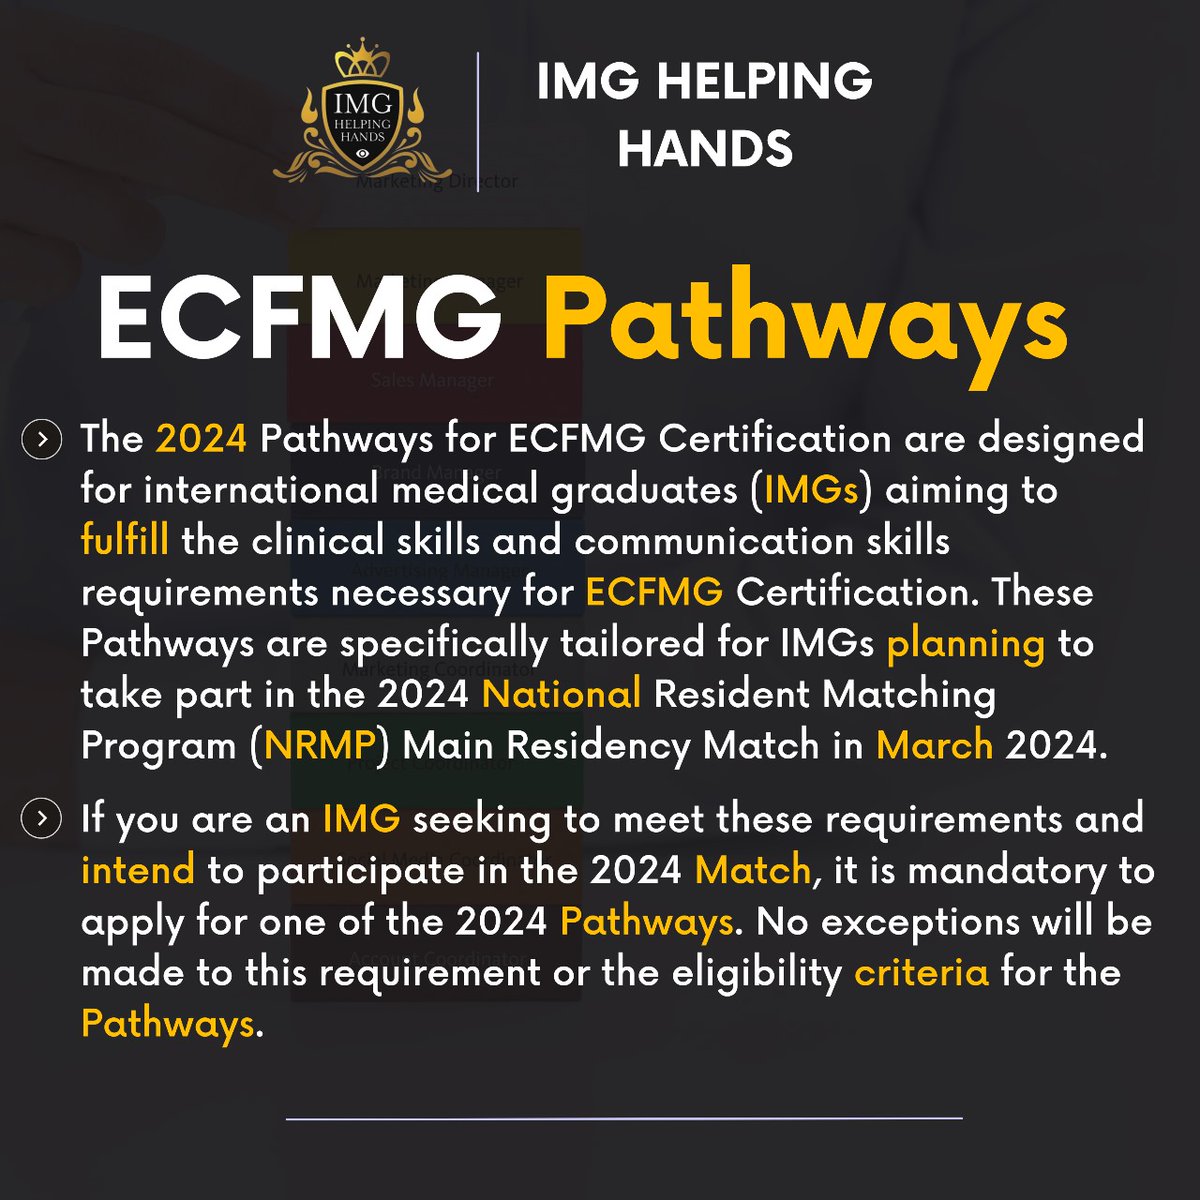 ECFMG certification pathways for the year 2024.
IMG Helping Hands provides you updates on all the residency related stuff you need to know.
Follow us on all our social media platforms if you want to stay updated.
.
.
.
.
#MedEd #MedX #ecfmg #imgs #match2024 #residency